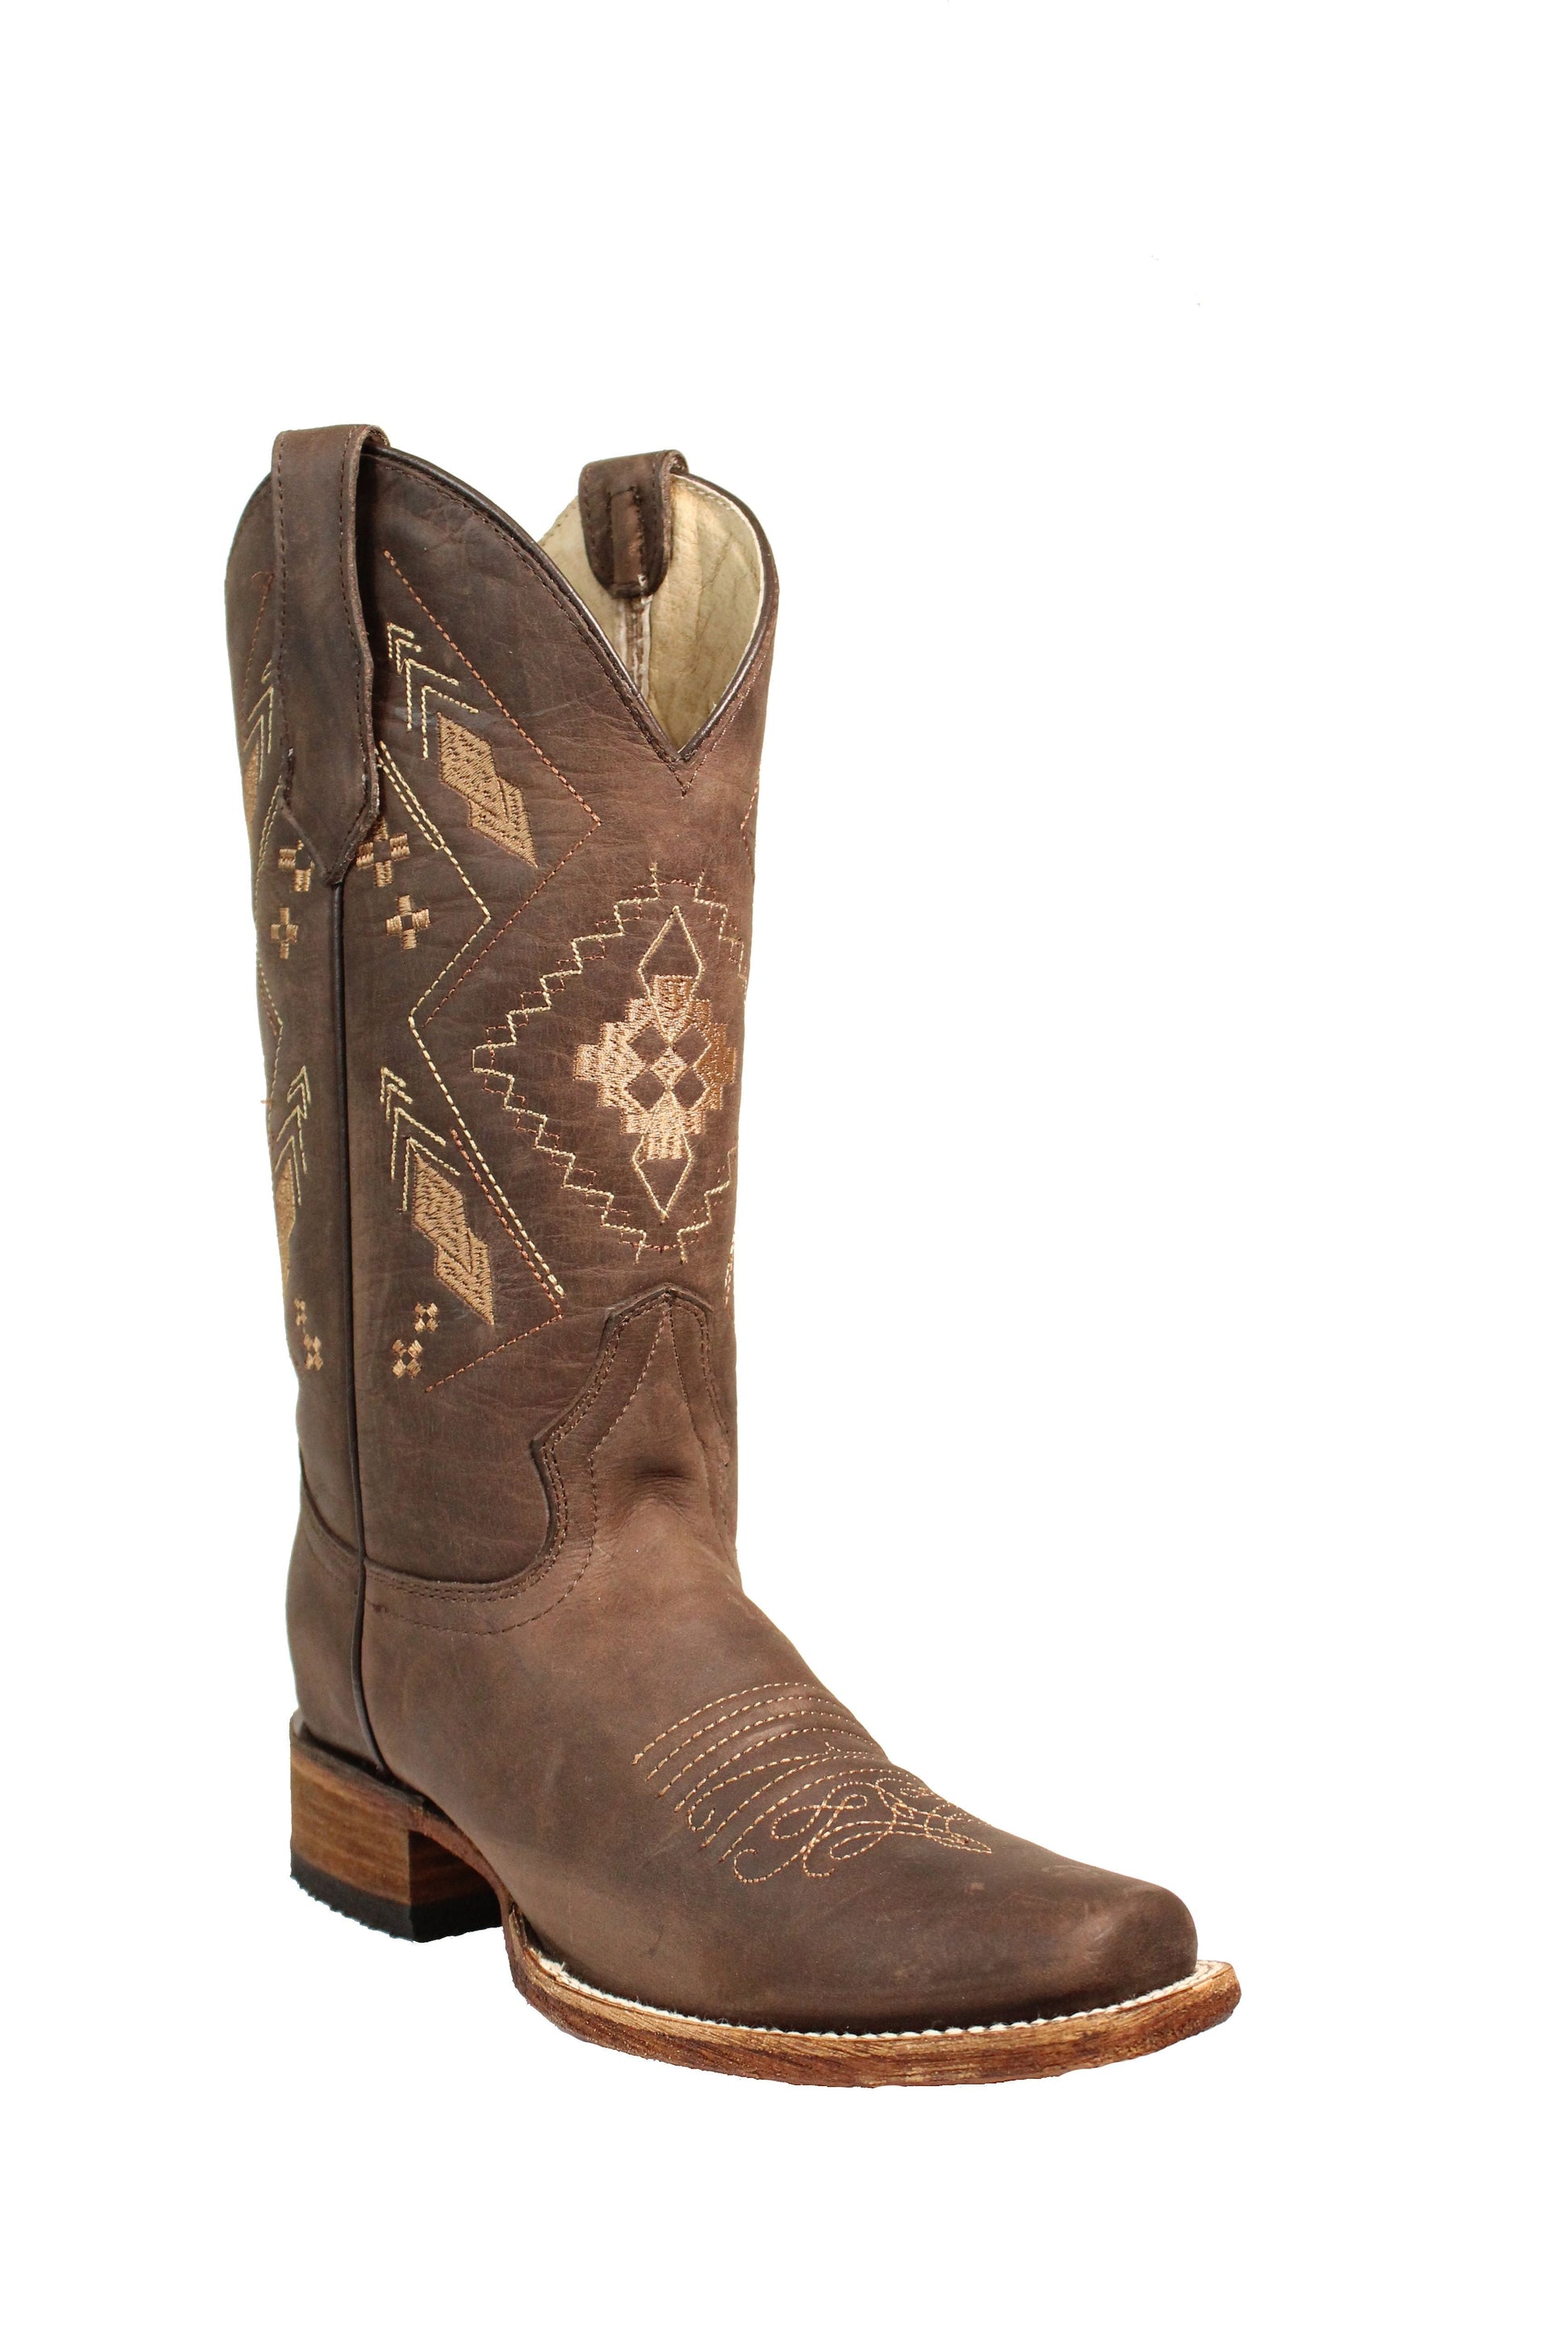 L5291 - Corral chocolate rodeo cowgirl leather boots for women-Kuet.us